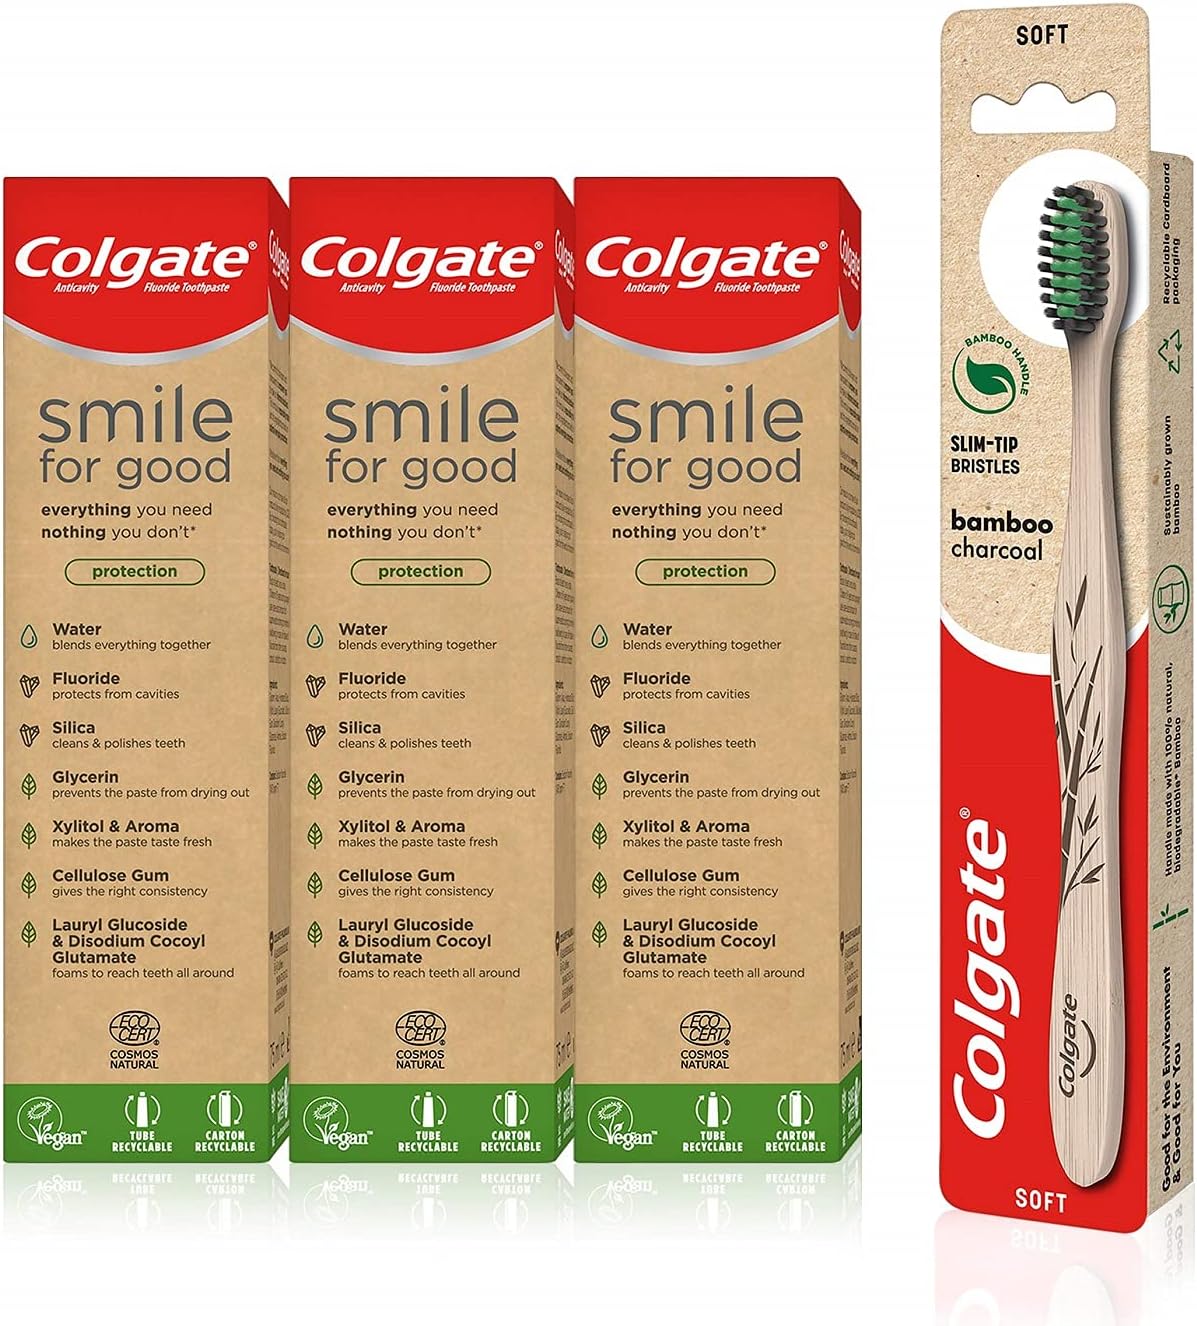 Colgate Bamboo Charcoal Toothbrush & Smile for Good Toothpaste 75ml 3 Pack RRP £19.99 CLEARANCE XL £14.99